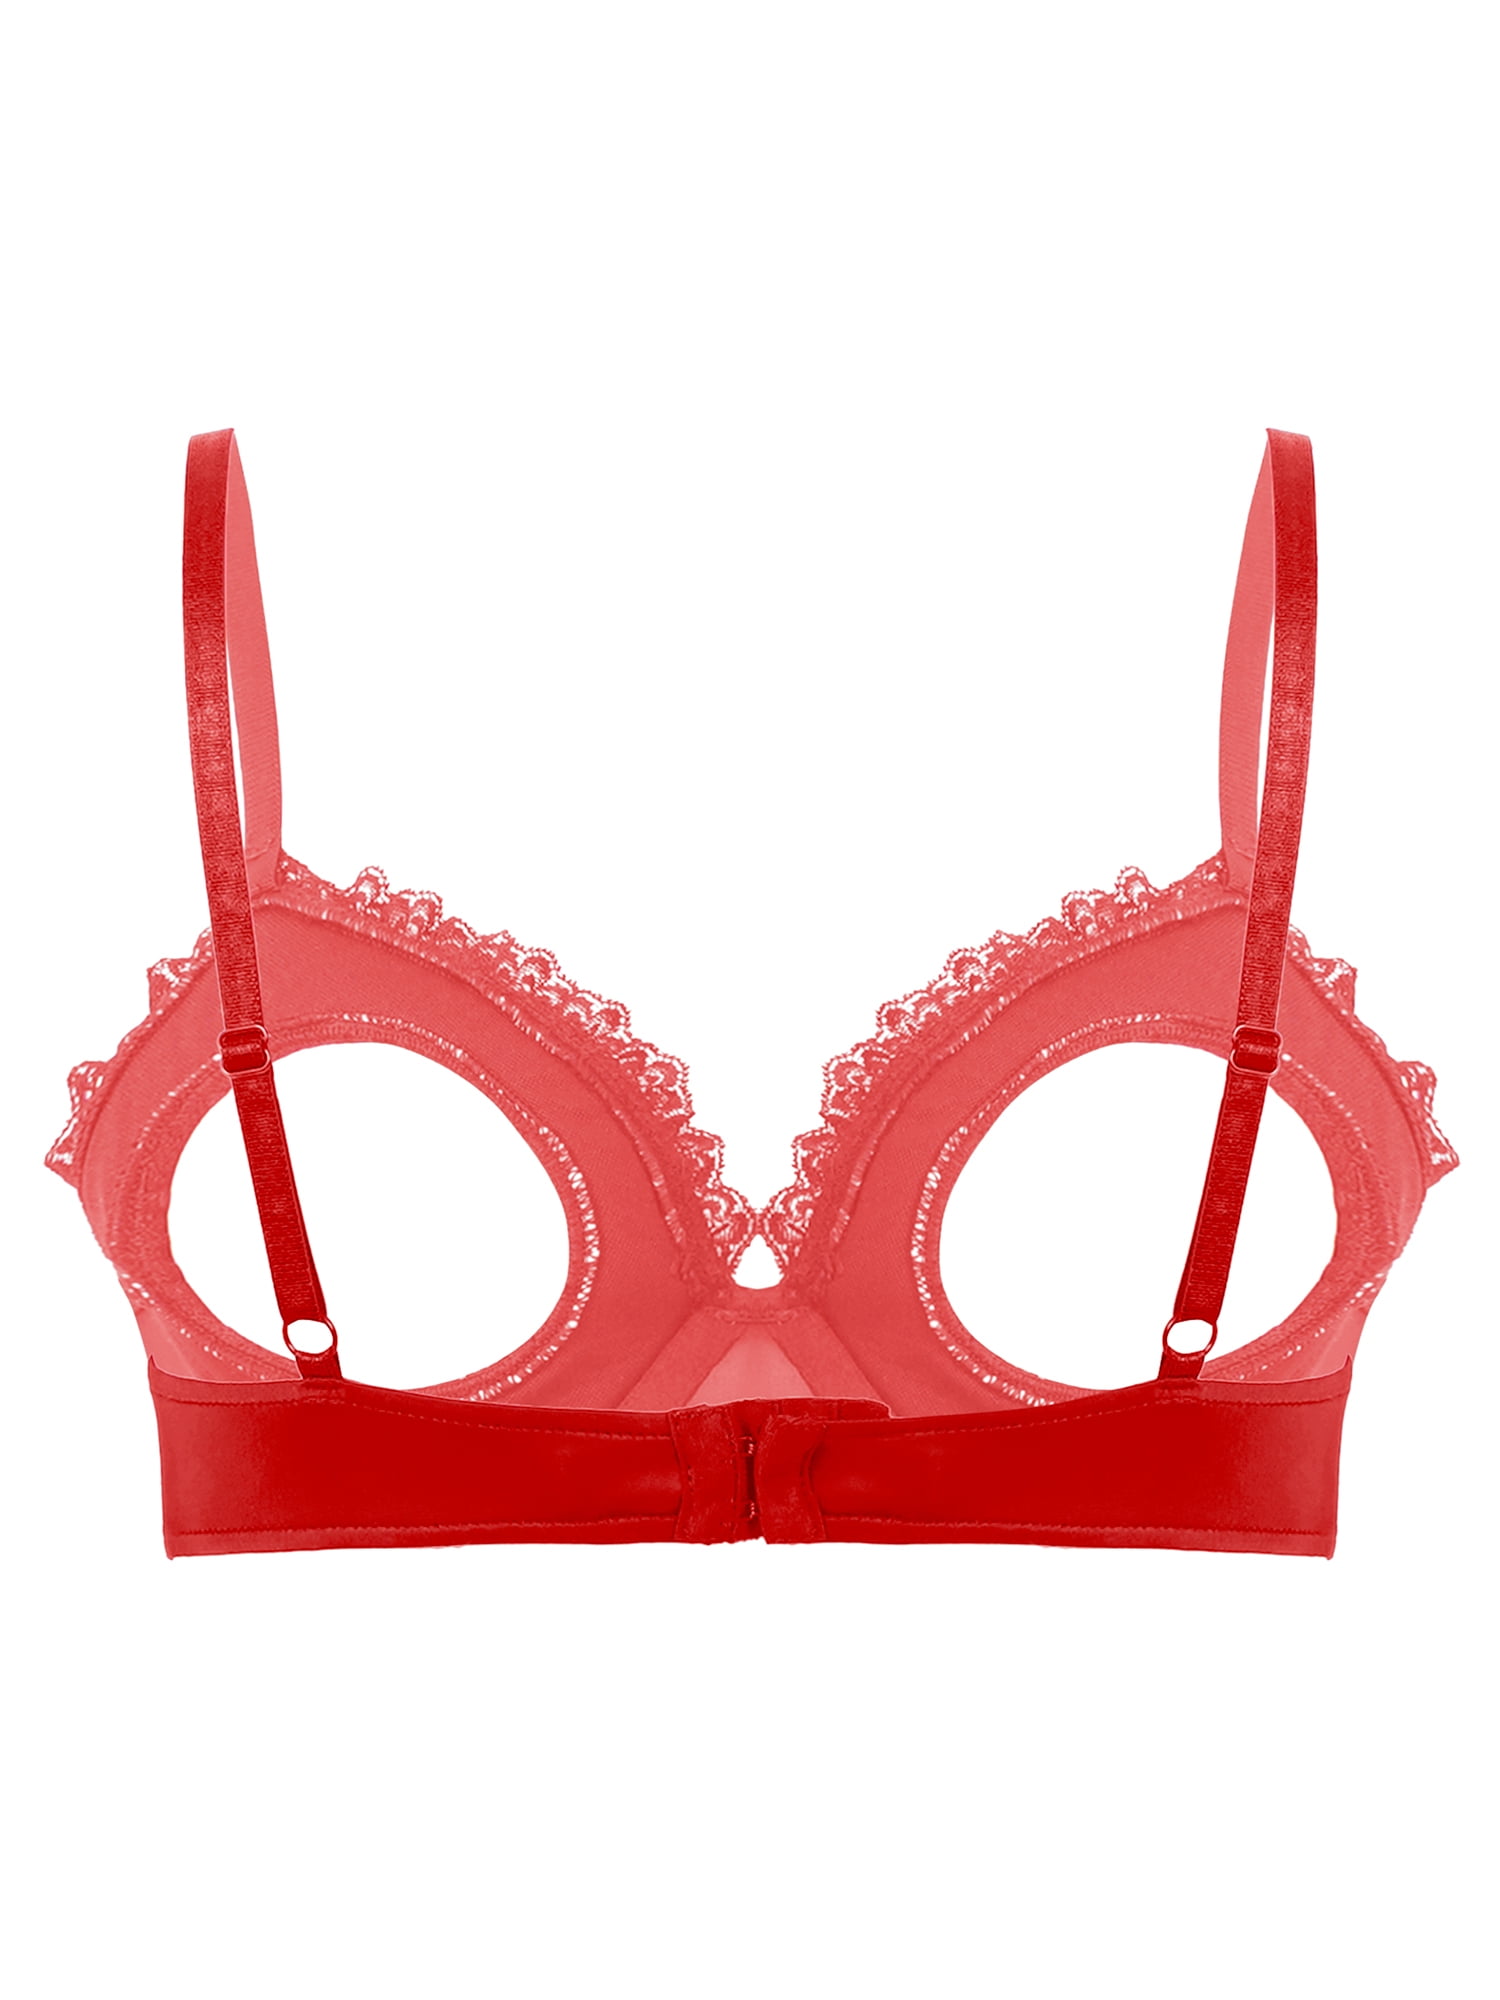 ZITIQUE Women's 3/4 Cup Comfy Non-wired Push Up Lace Bra - Red 2024, Buy  ZITIQUE Online